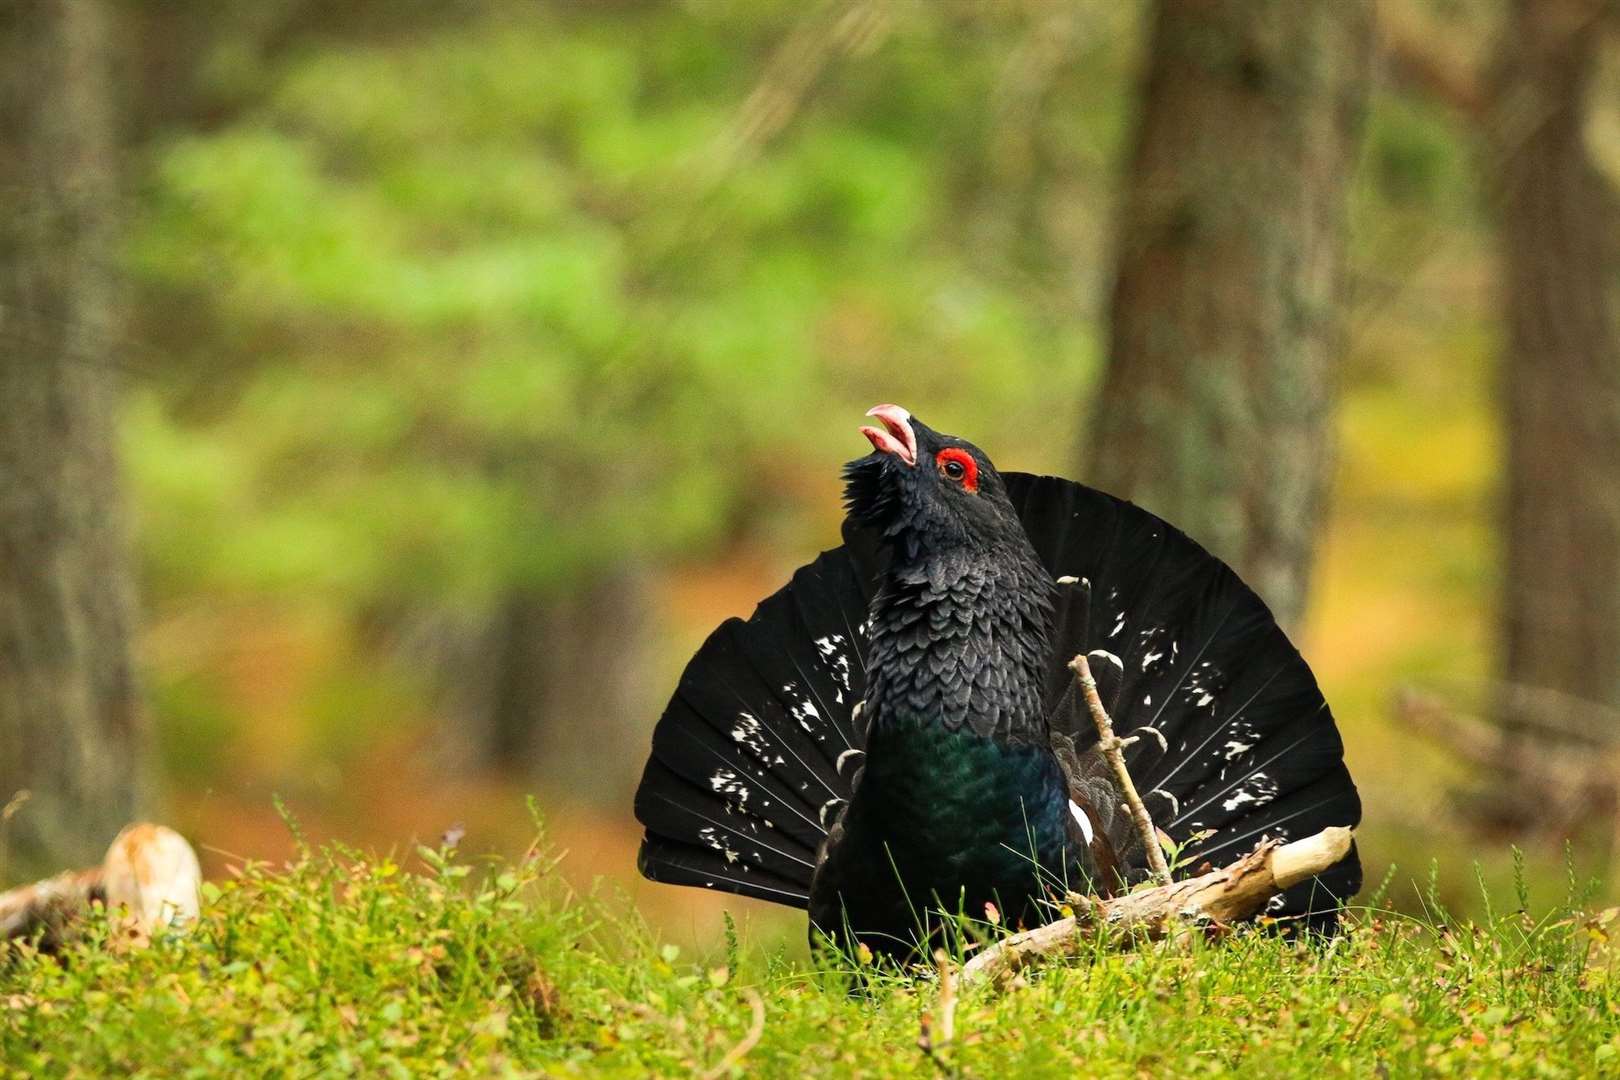 There may be as few as 500 capercaillie remaining in the wild, it is being warned. Picture: Jude Dinham-Price.